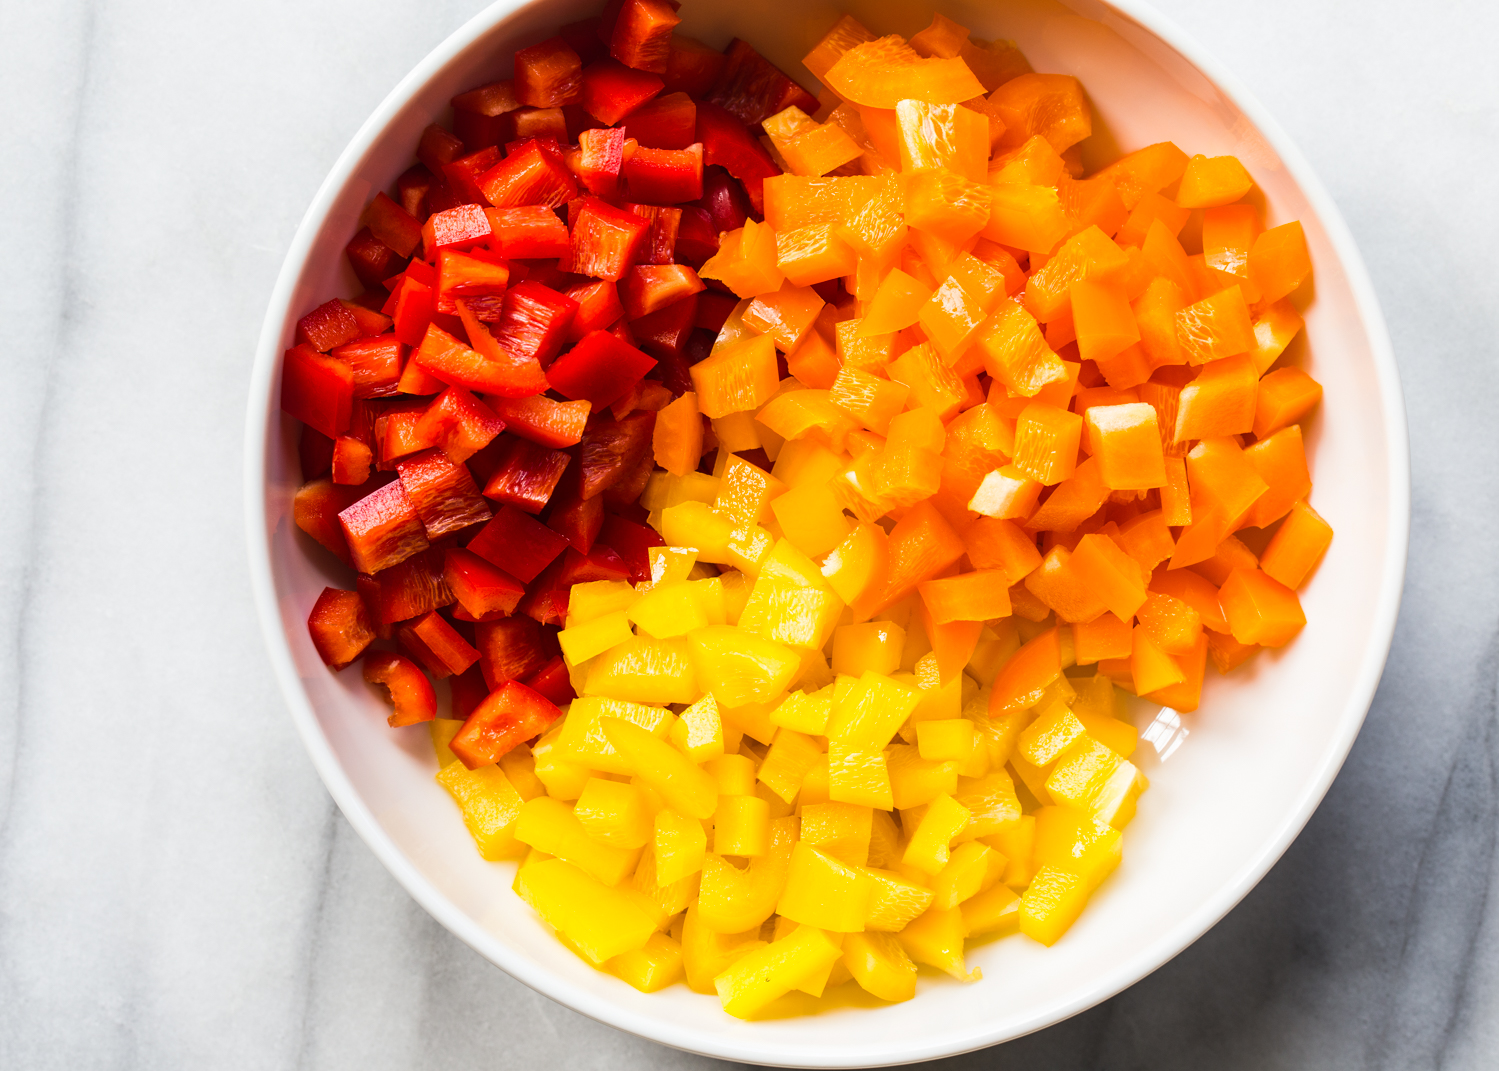 Tri Color Peppers for Homemade Pickled Pepper Relish - Homemade Hot Dog Toppings